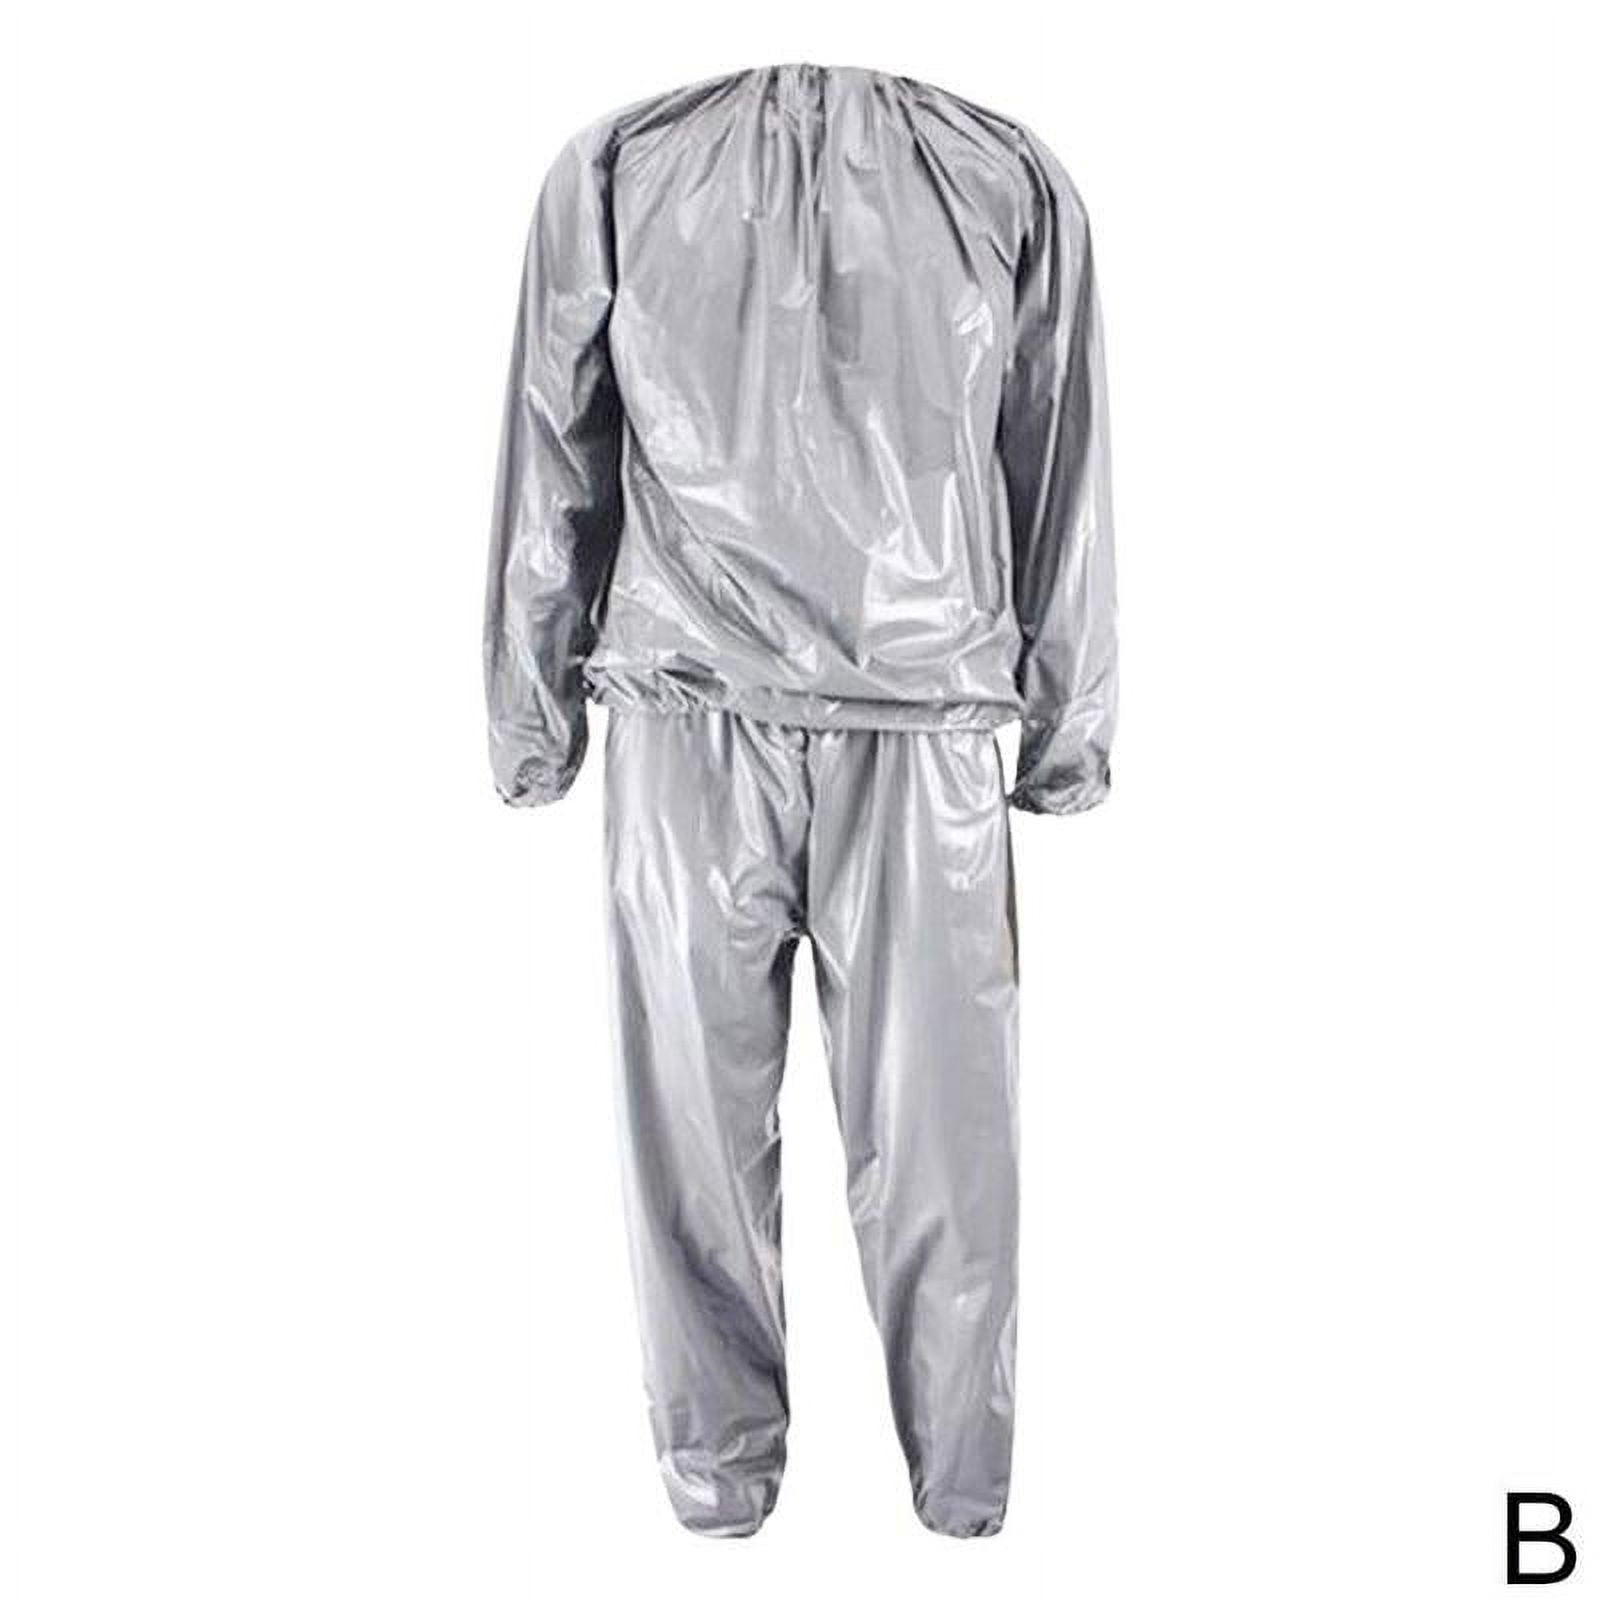 Heavy Duty DEFY Sauna Sweat Suit Exercise Suit Fitness Loss Anti-Rip ...